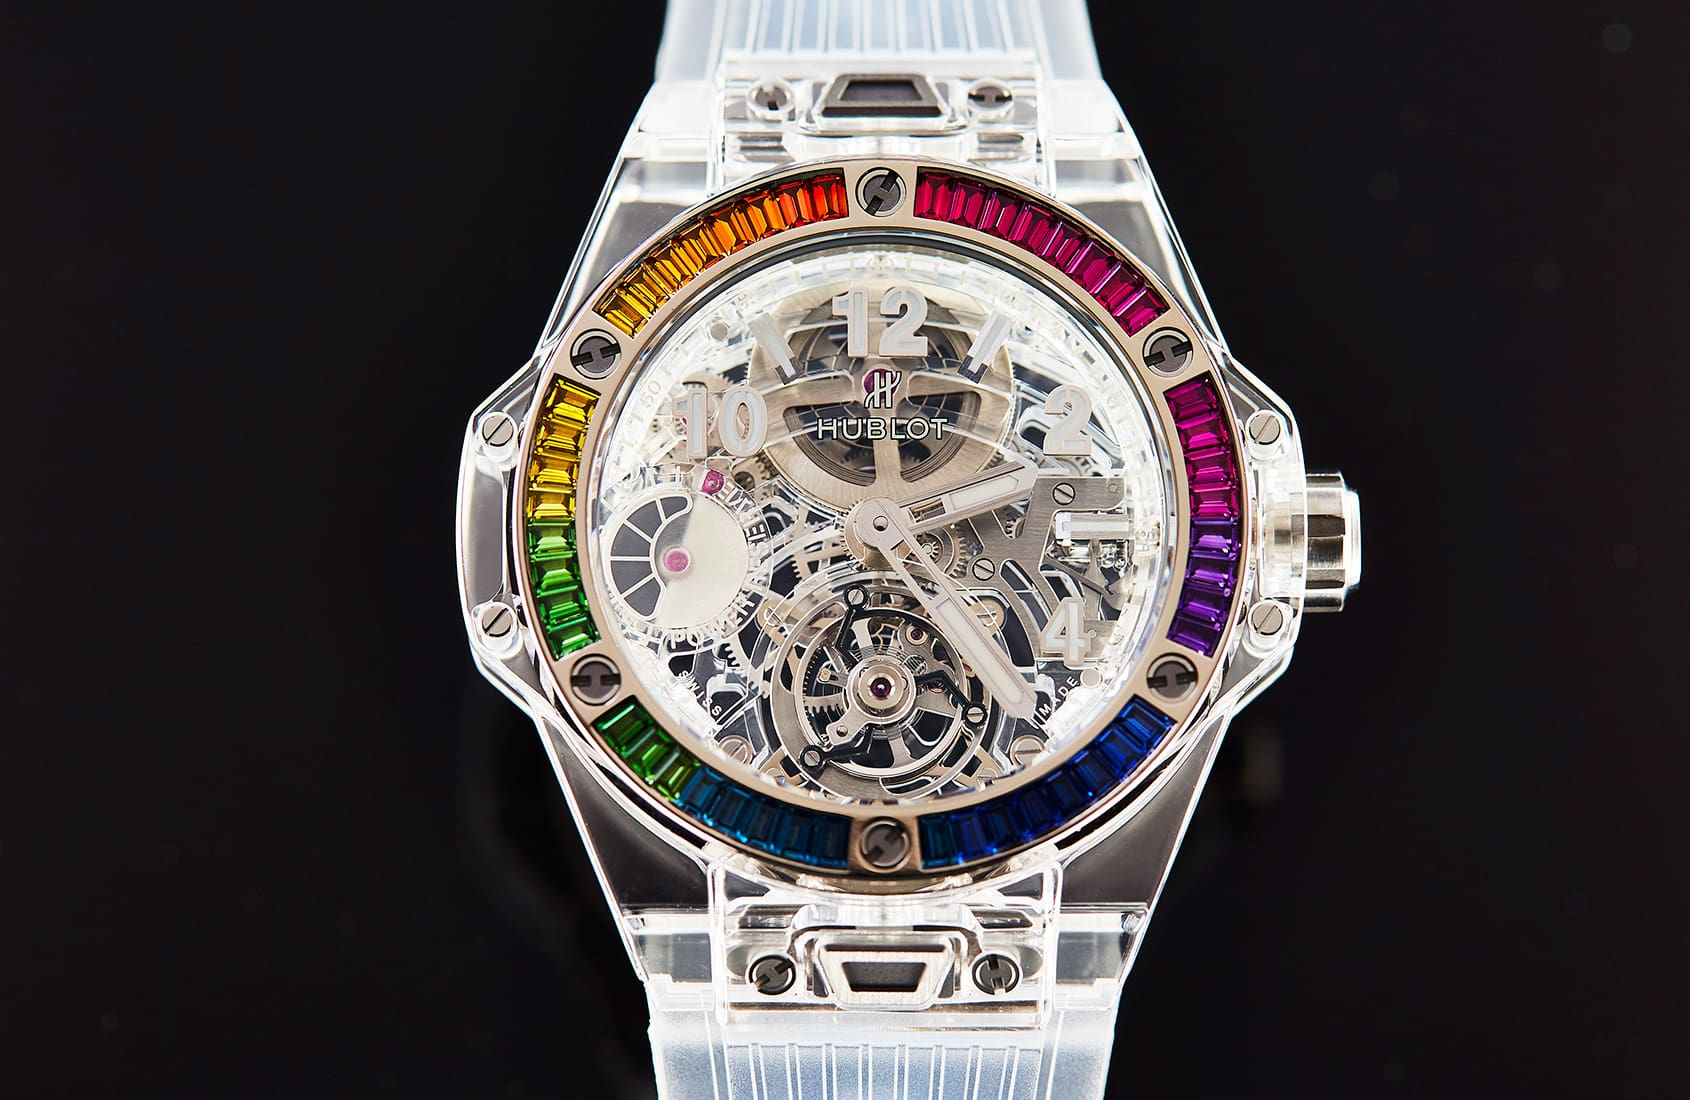 Taking another look at the Hublot Big Bang Tourbillon Power Reserve 5 Days Sapphire Rainbow